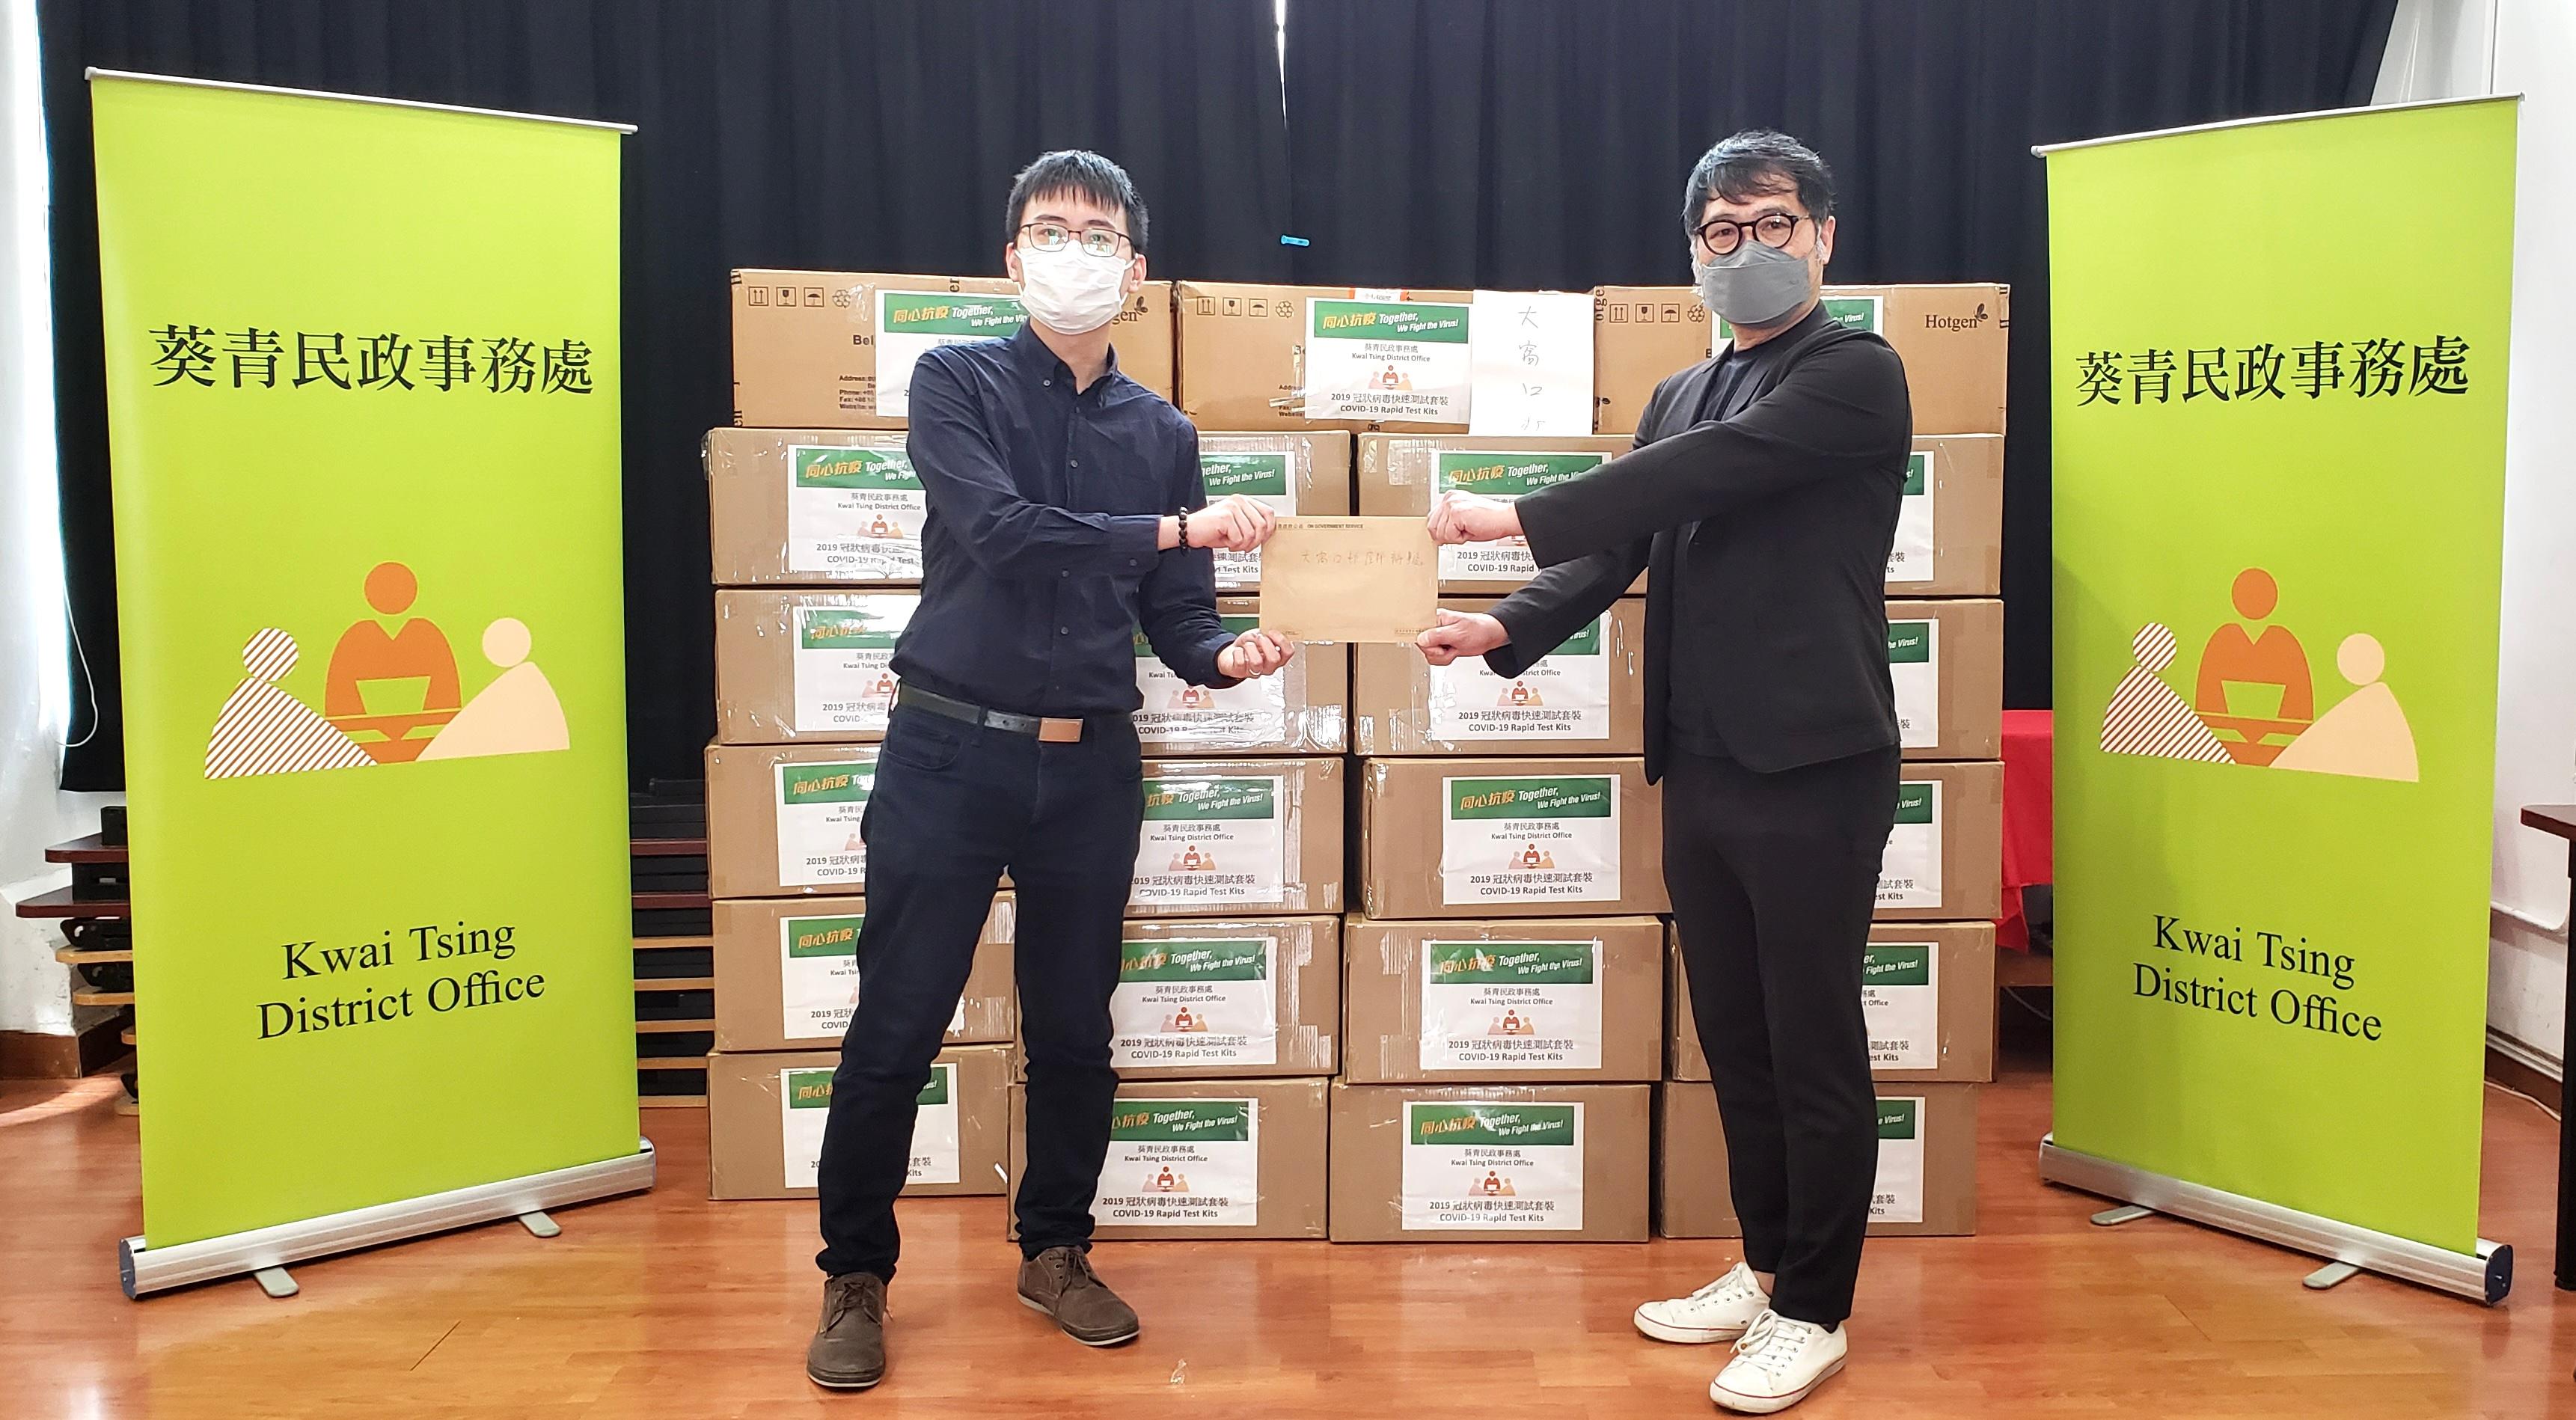 The Kwai Tsing District Office today (March 10) distributed COVID-19 rapid test kits to households, cleansing workers and property management staff living and working in Tai Wo Hau Estate for voluntary testing through the Housing Department.